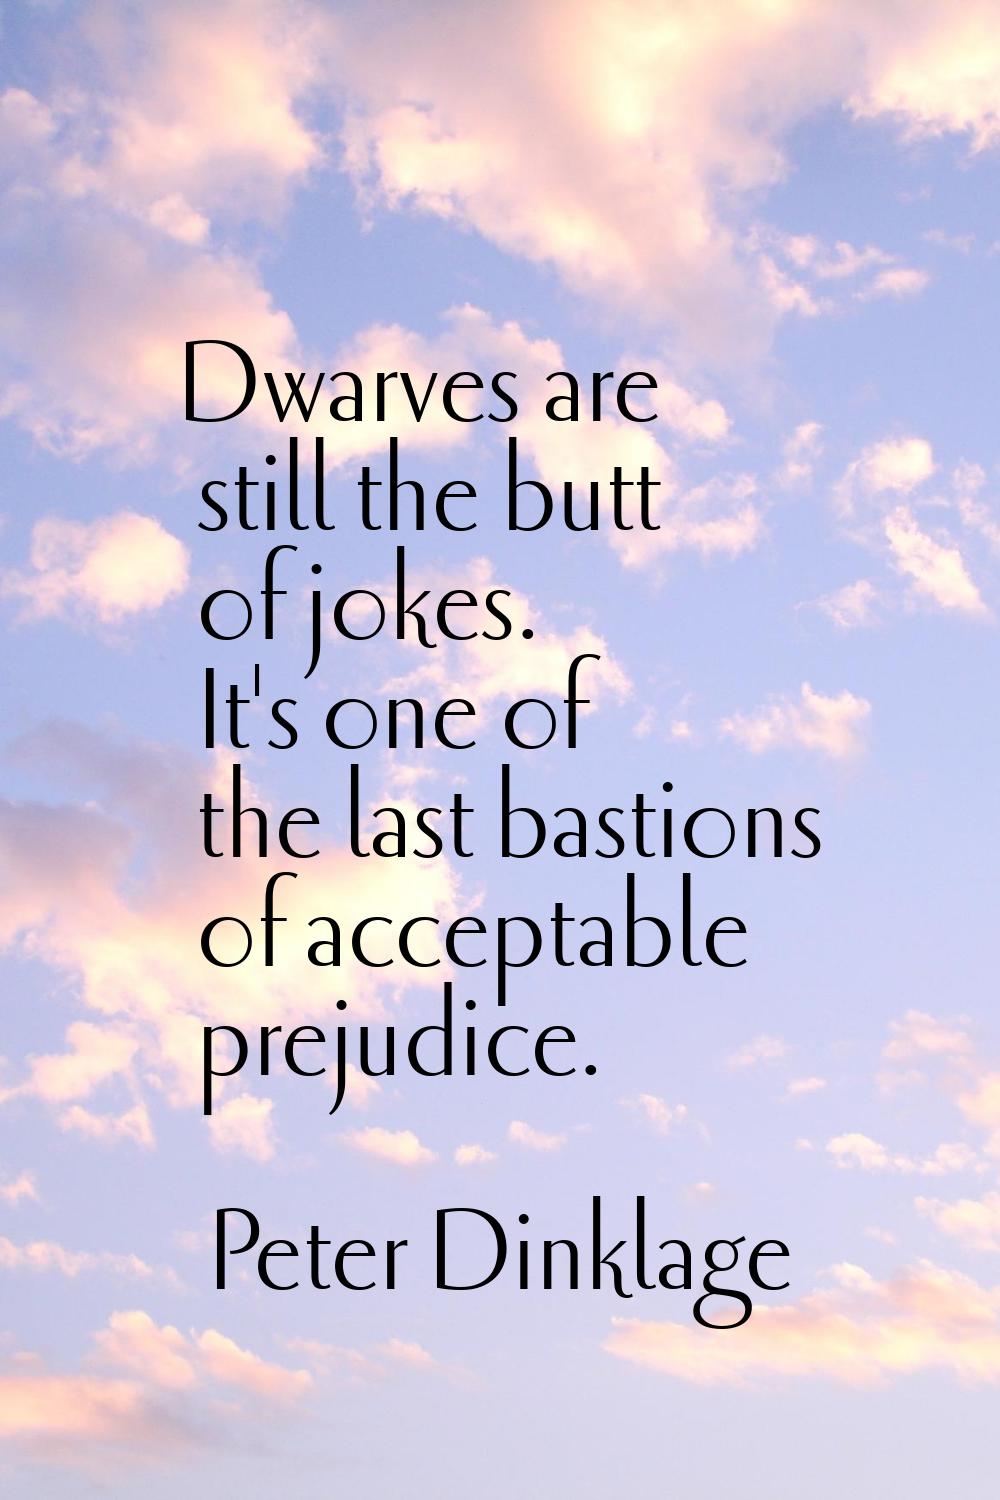 Dwarves are still the butt of jokes. It's one of the last bastions of acceptable prejudice.